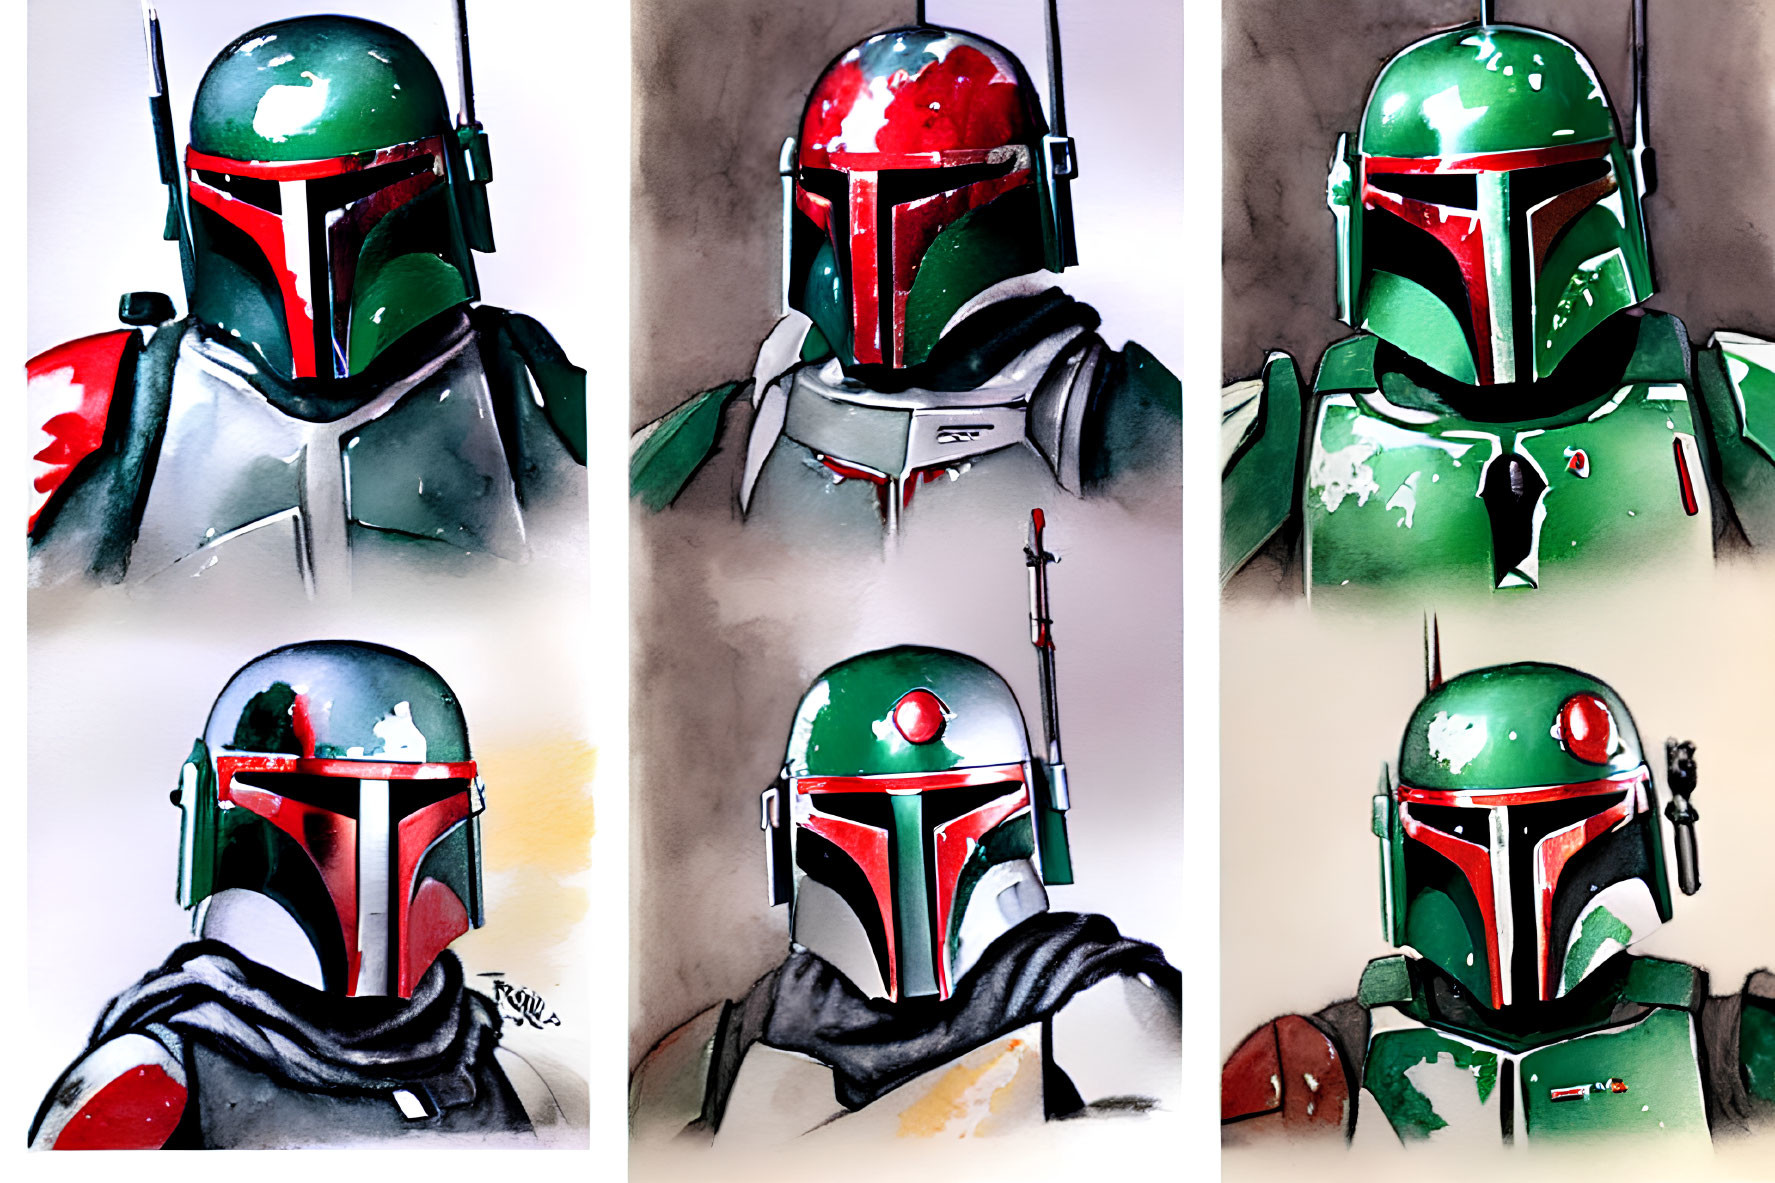 Six Painted Illustrations of Character in Green and Red Mandalorian Armor